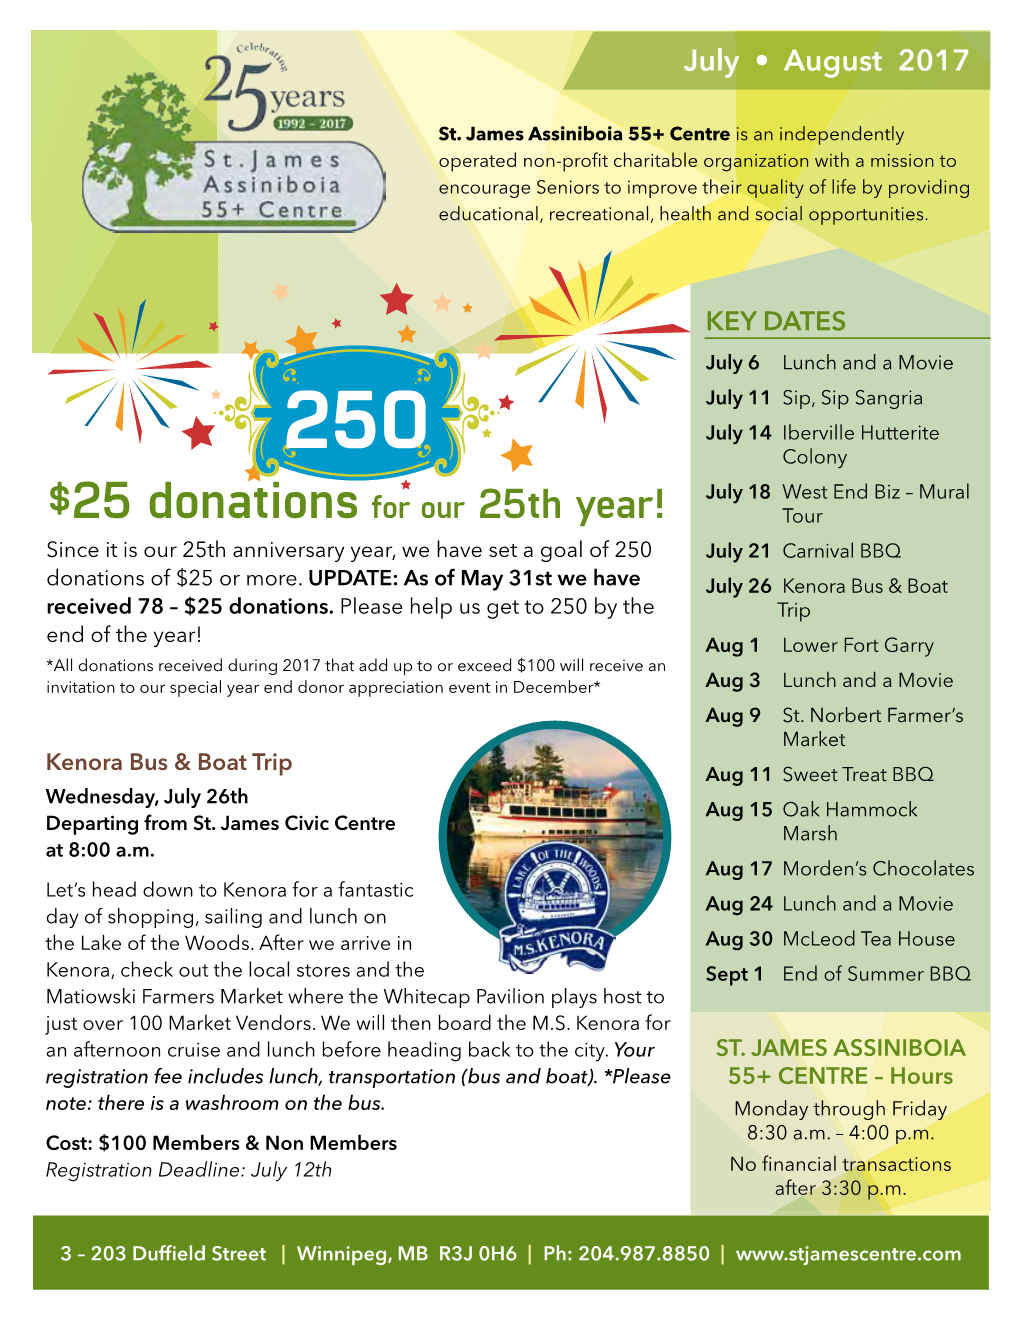 $25 Donations for Our 25Th Year! Tour Since It Is Our 25Th Anniversary Year, We Have Set a Goal of 250 July 21 Carnival BBQ Donations of $25 Or More